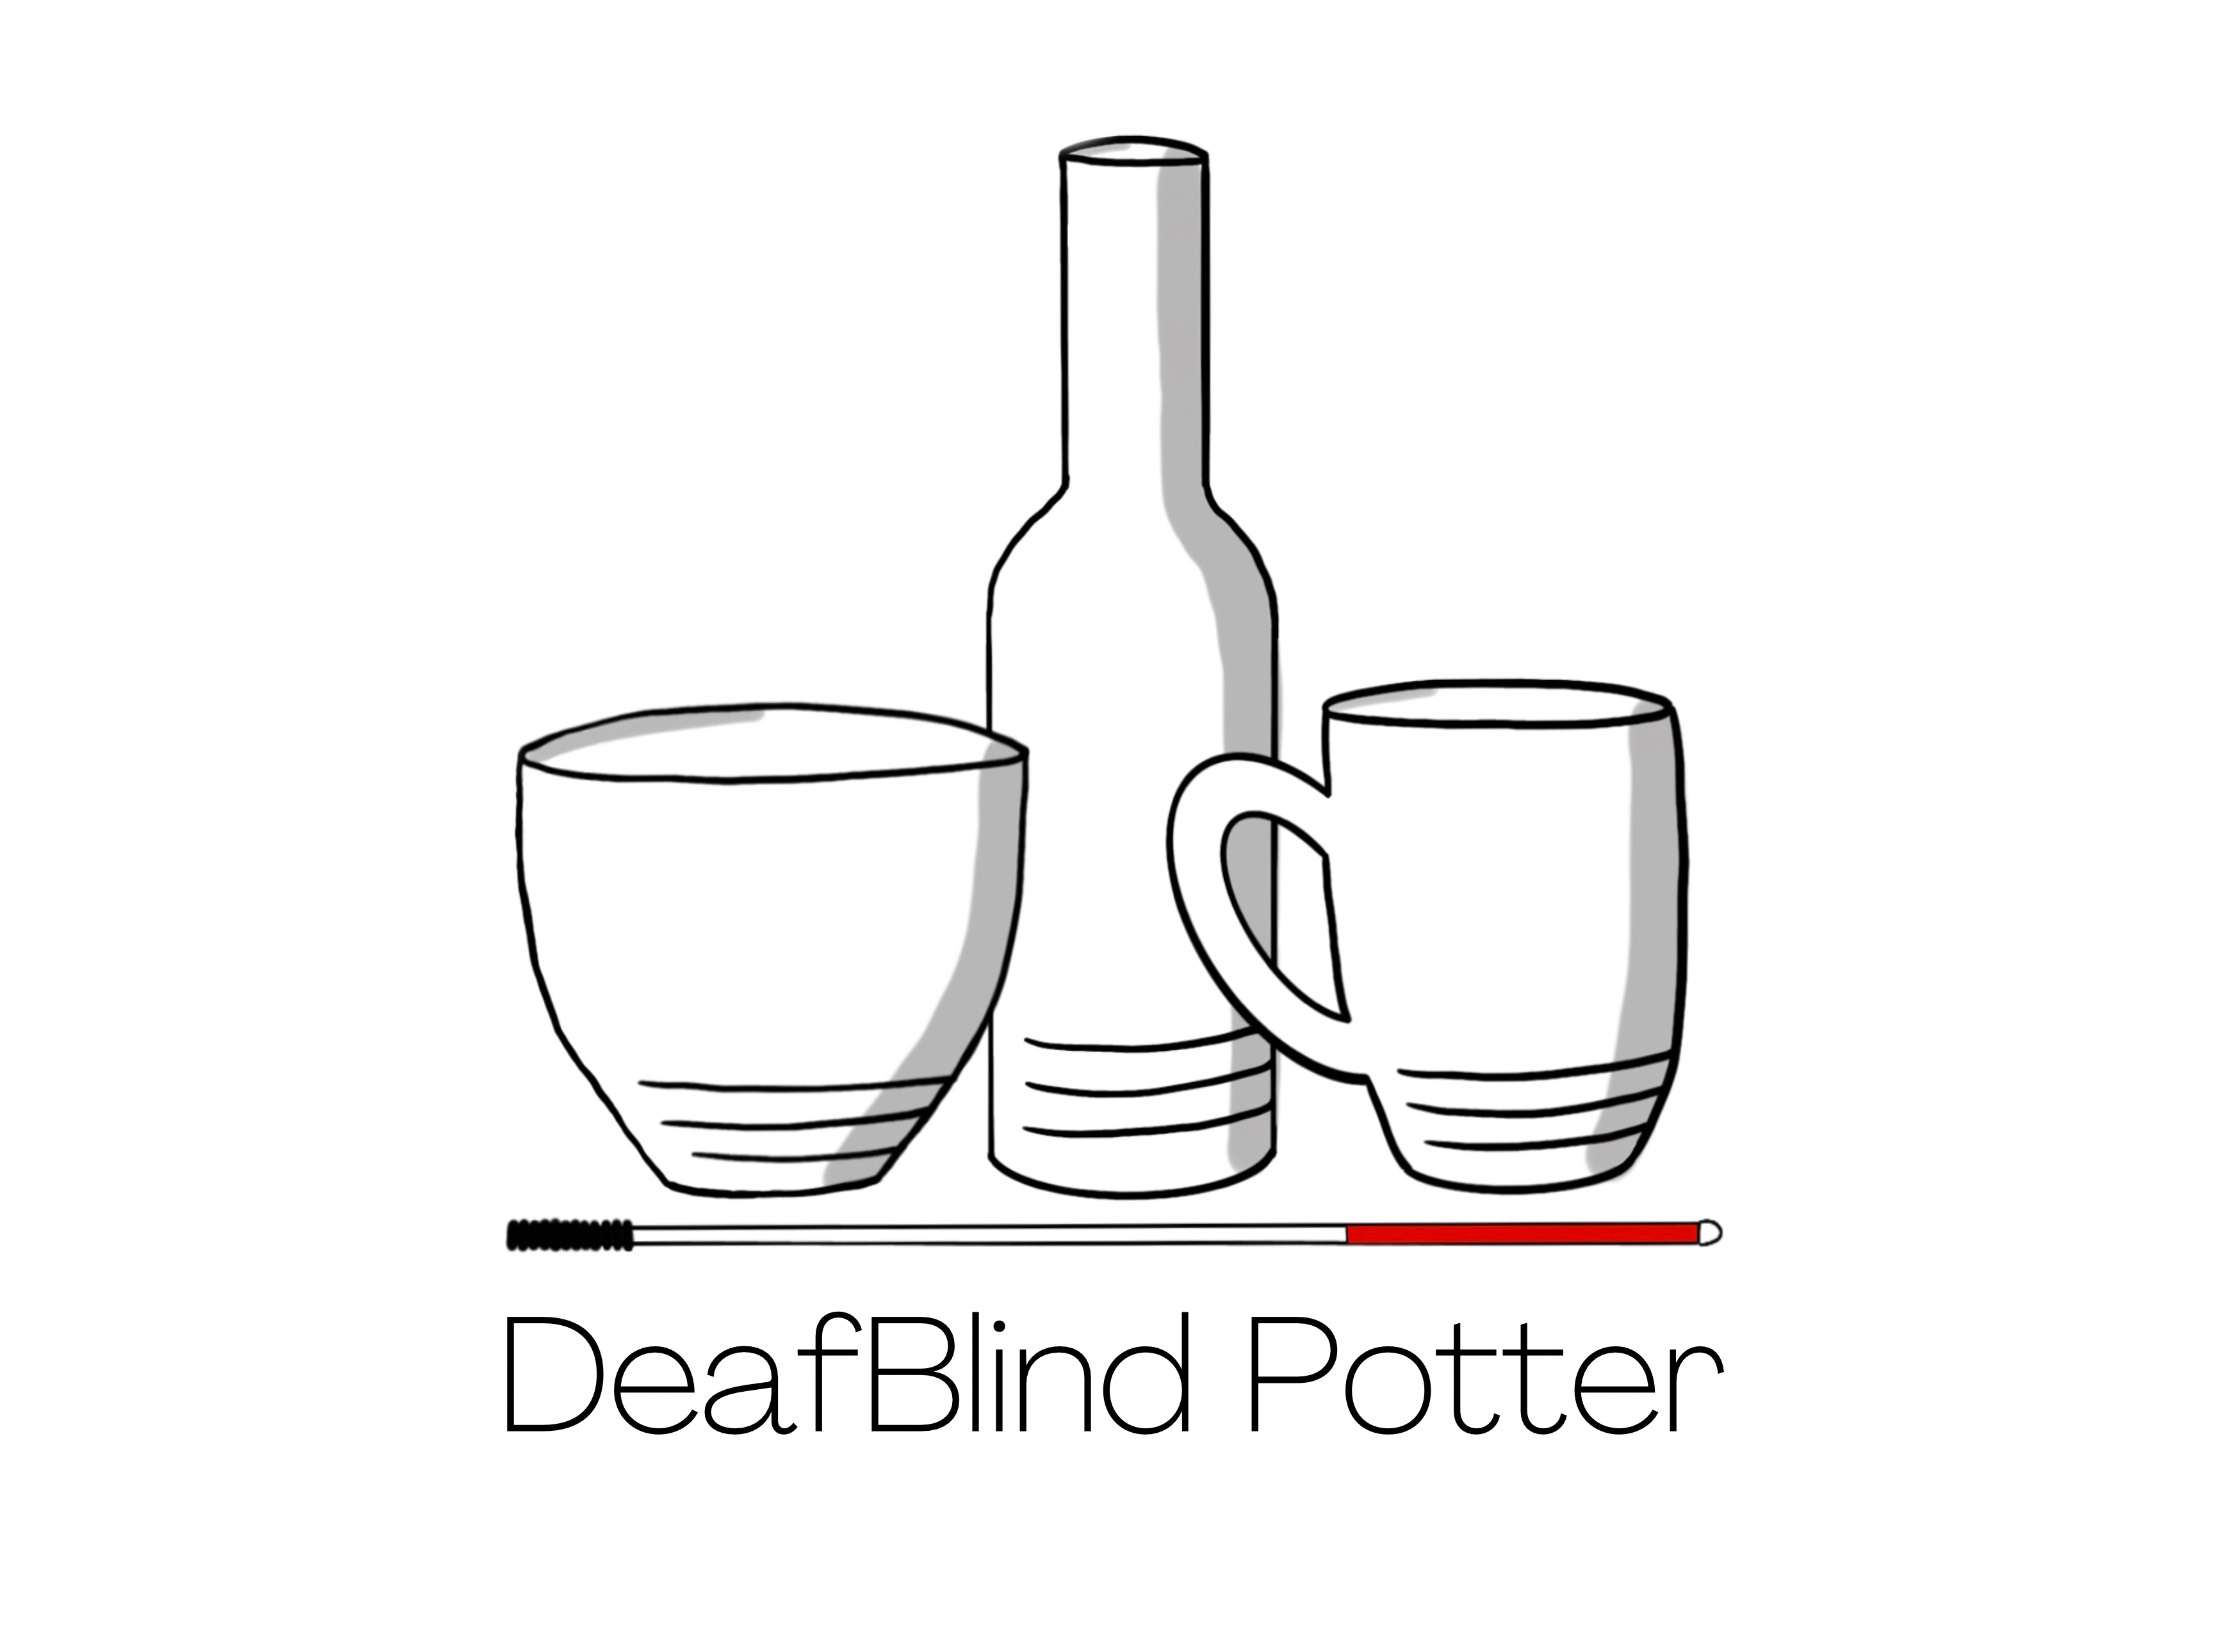 DeafBlind Potter logo with bowl, bottle, mug outlined. With a white cane as a table 